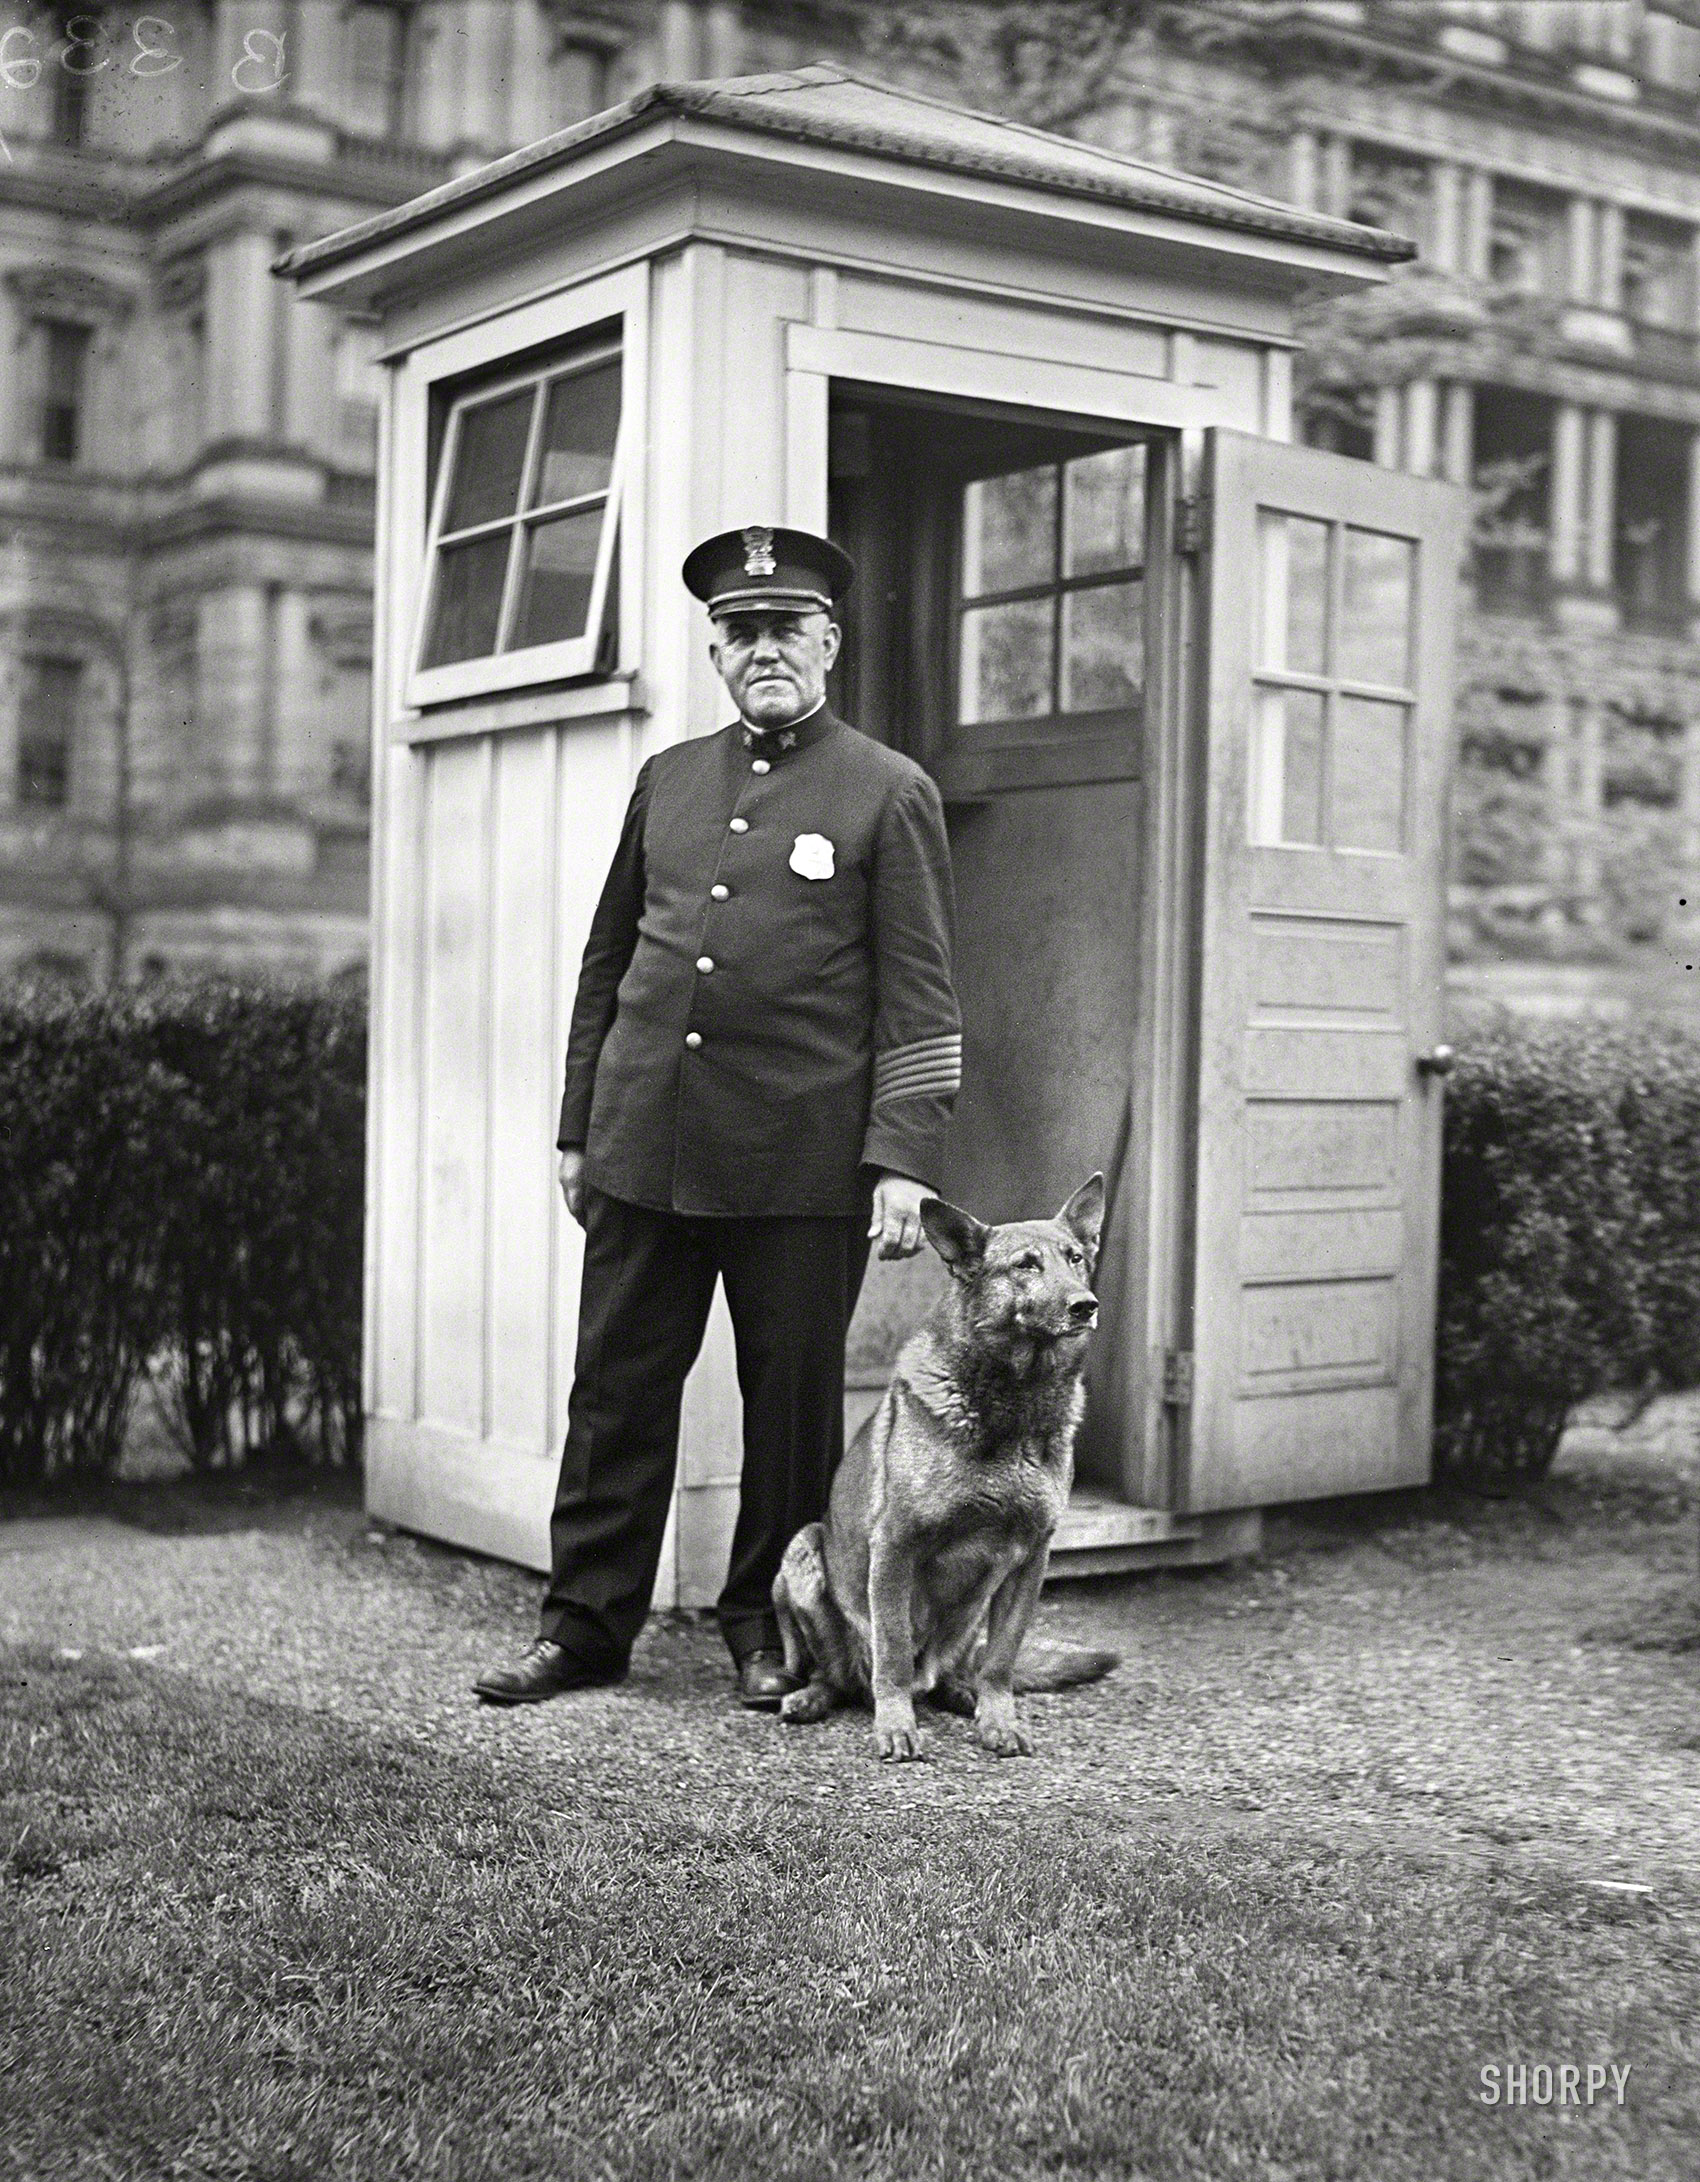 April 12, 1929. "King Tut, President Hoover's big German police dog, now makes the rounds of the sentry boxes in the White House grounds through the night. He is shown with W.S. Newton of the White House police." State, War & Navy building in the background. Harris & Ewing glass negative. View full size.